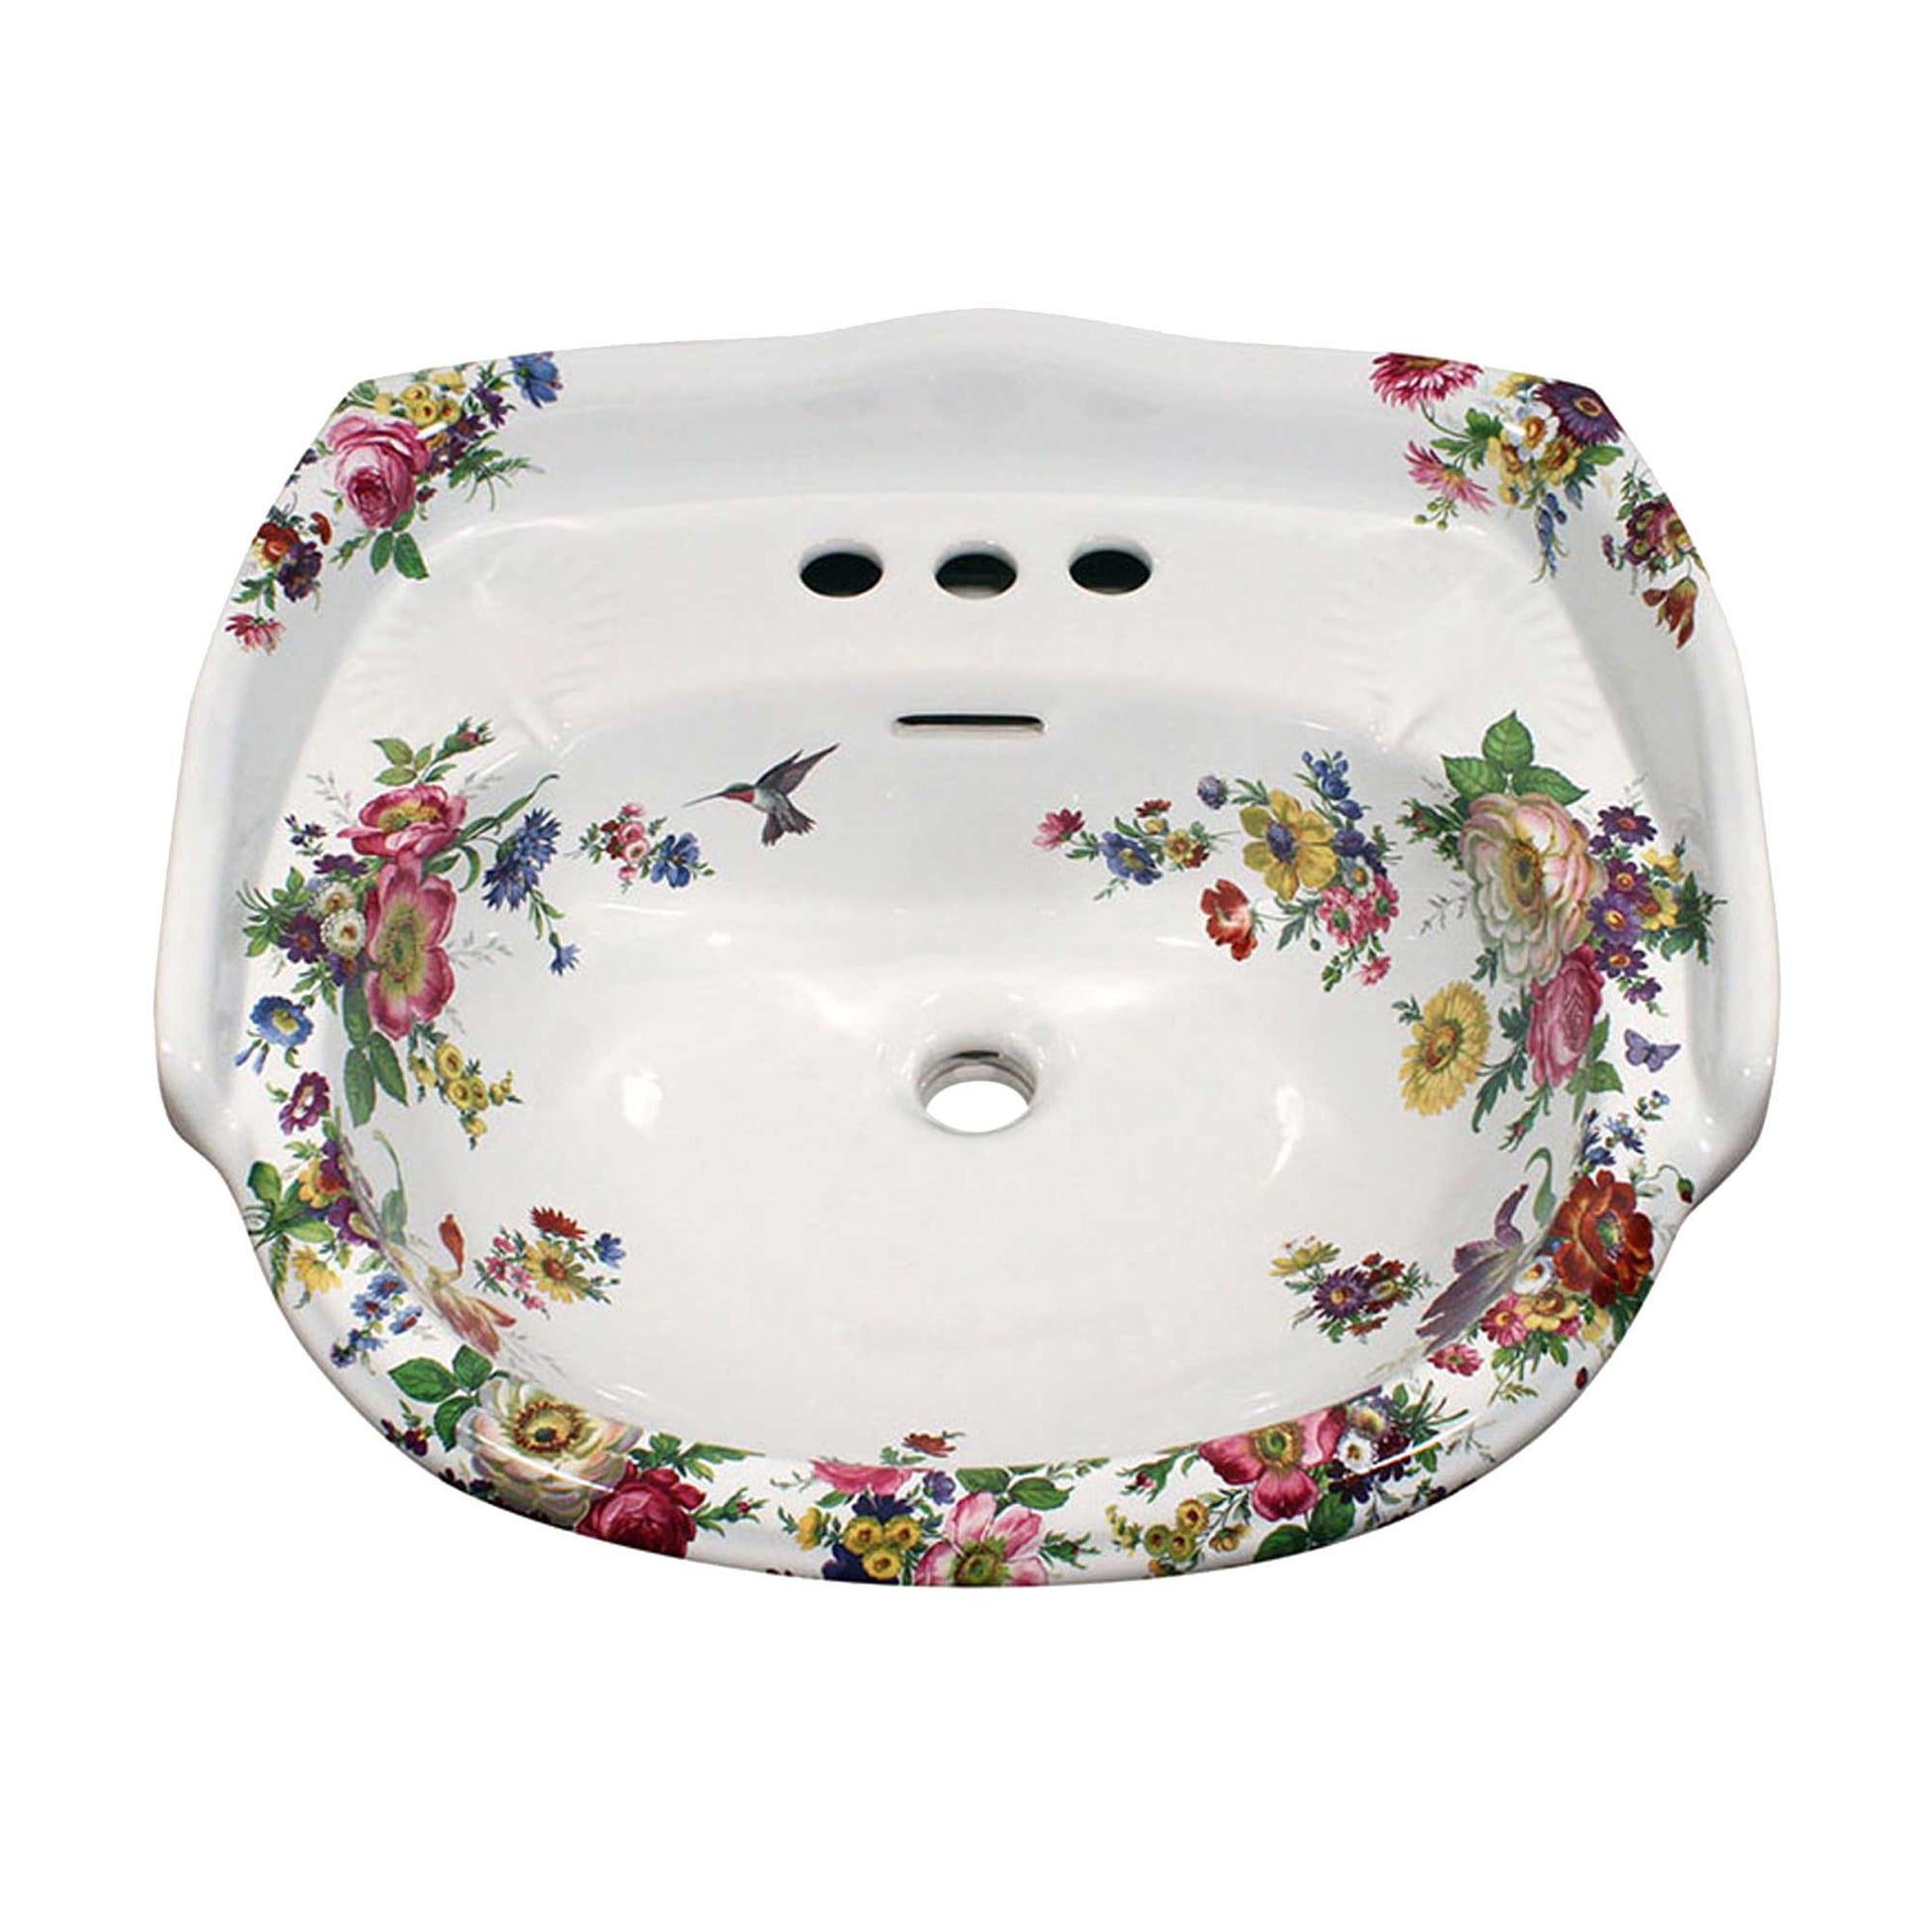 Pedestal sink bowl painted with Meissen flowers and hummingbird